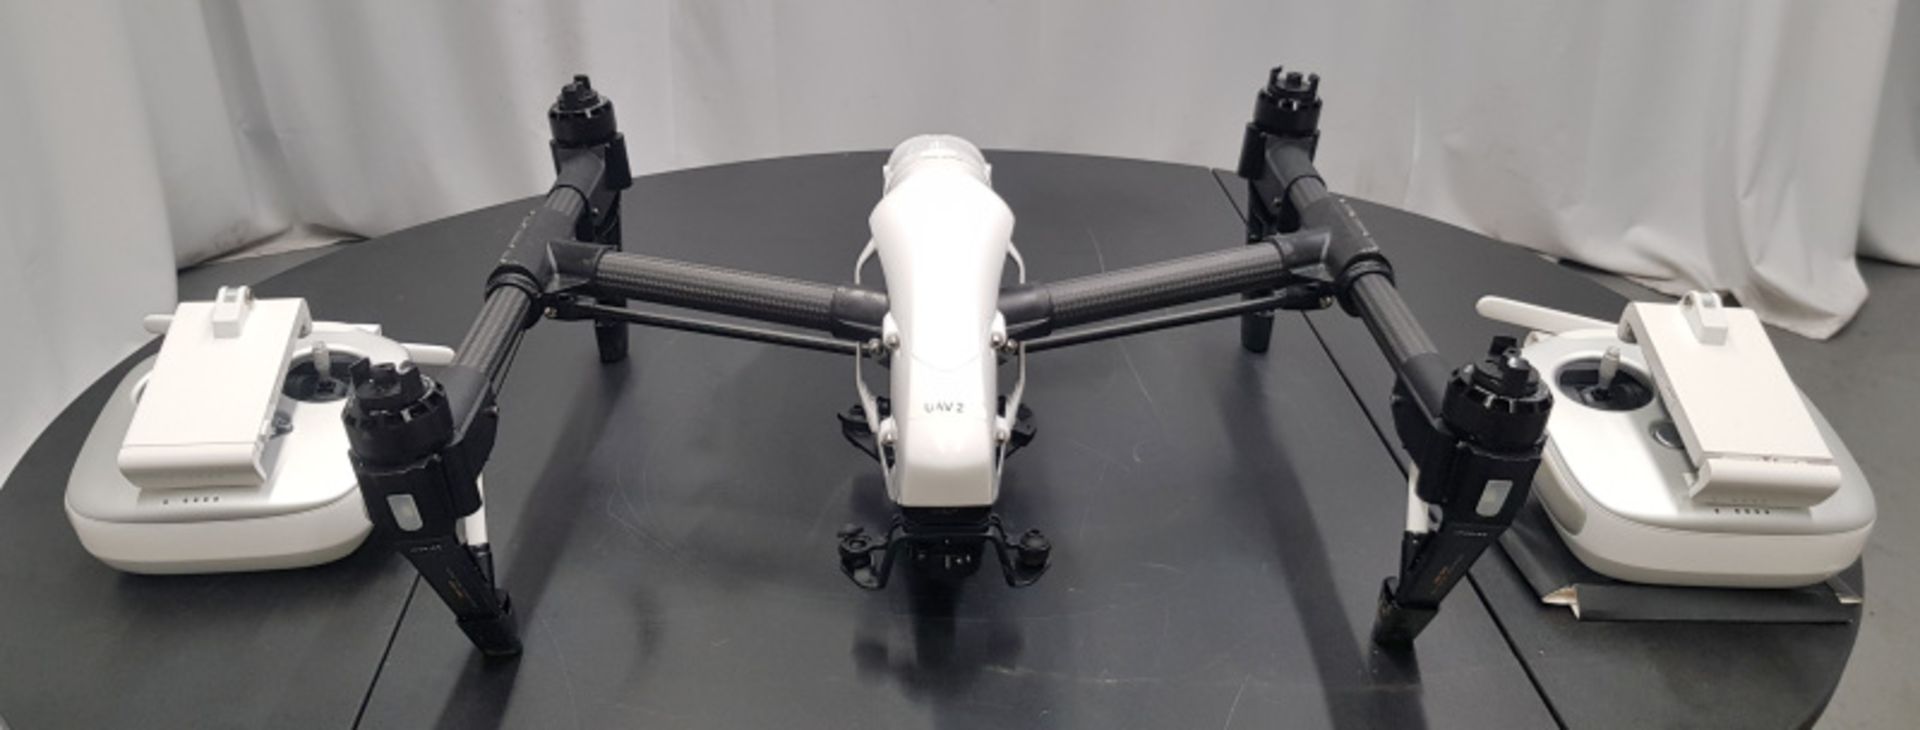 DJI Inspire 1 Pro Drone Set in case - 2 controllers, DJI ZENMUSE x5 1:1./15 ASPH lens - Image 3 of 11